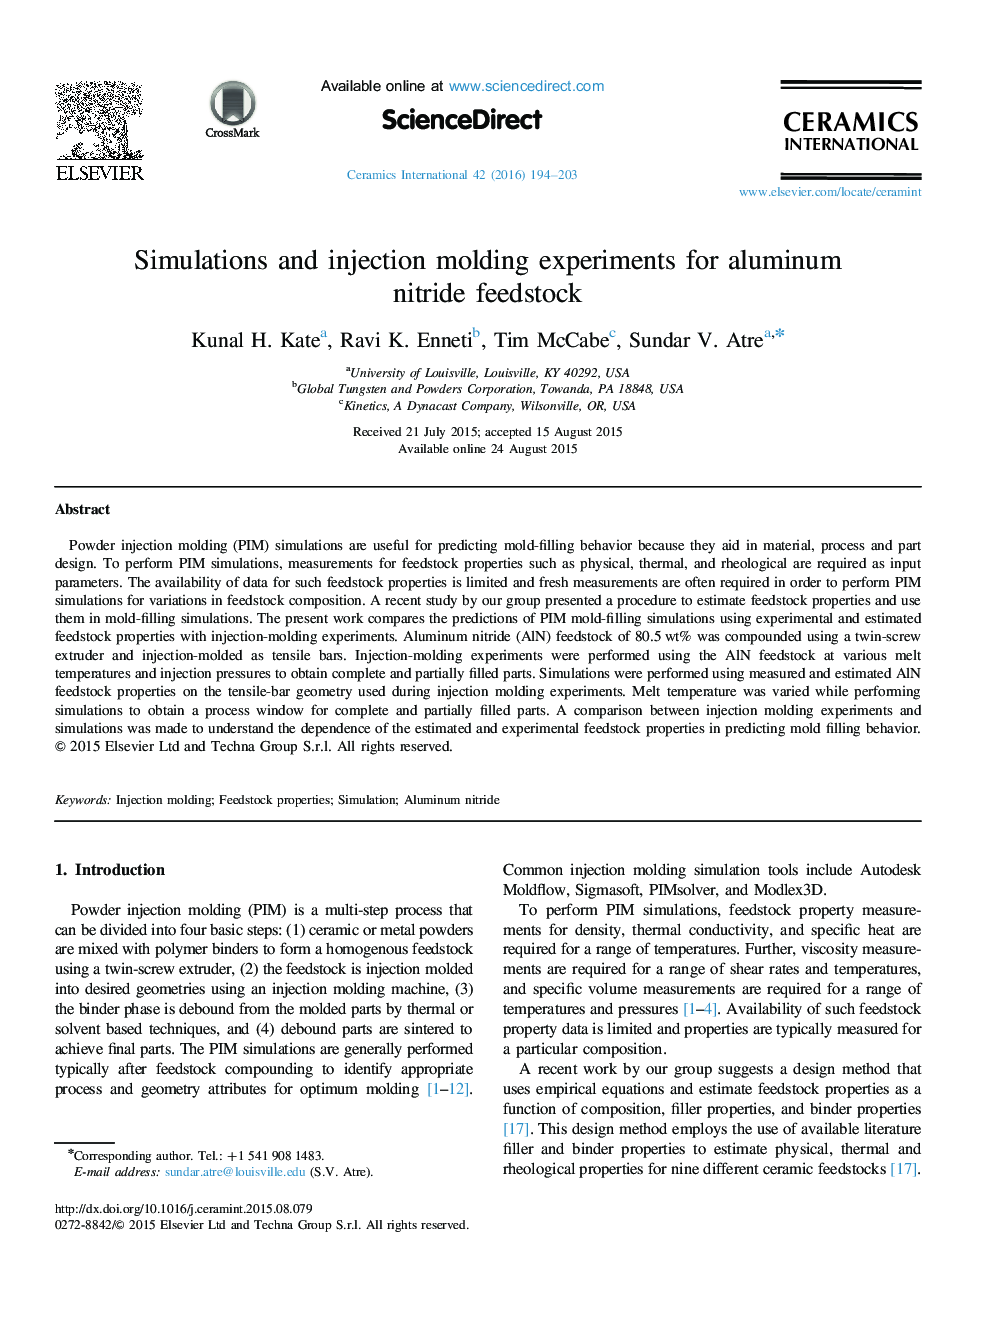 Simulations and injection molding experiments for aluminum nitride feedstock